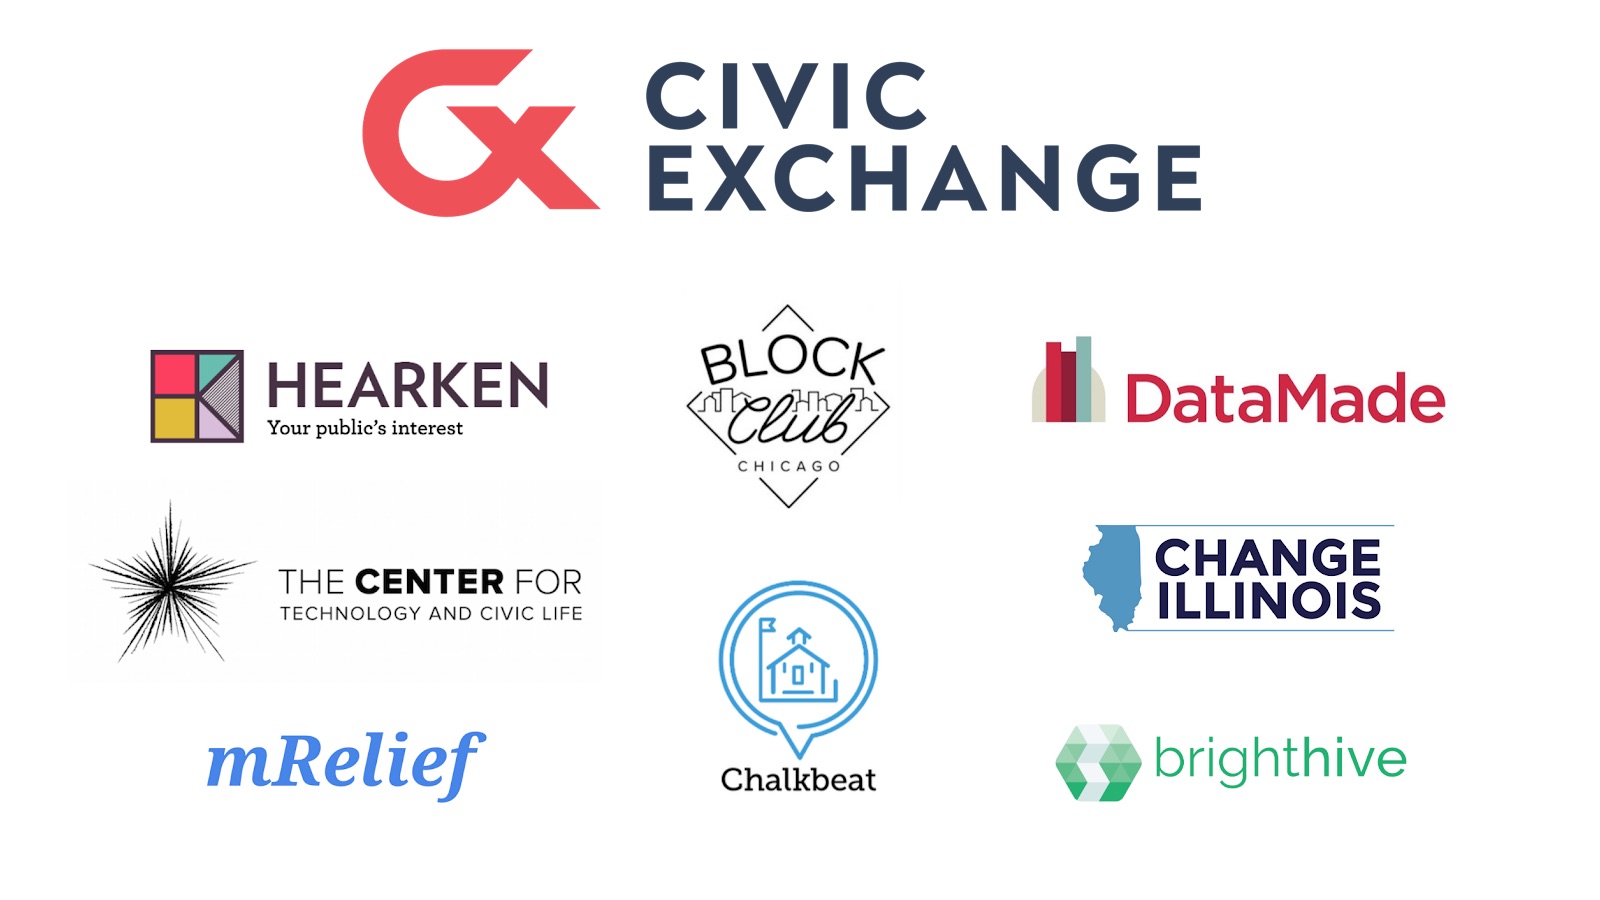 Introducing Civic Exchange Chicago